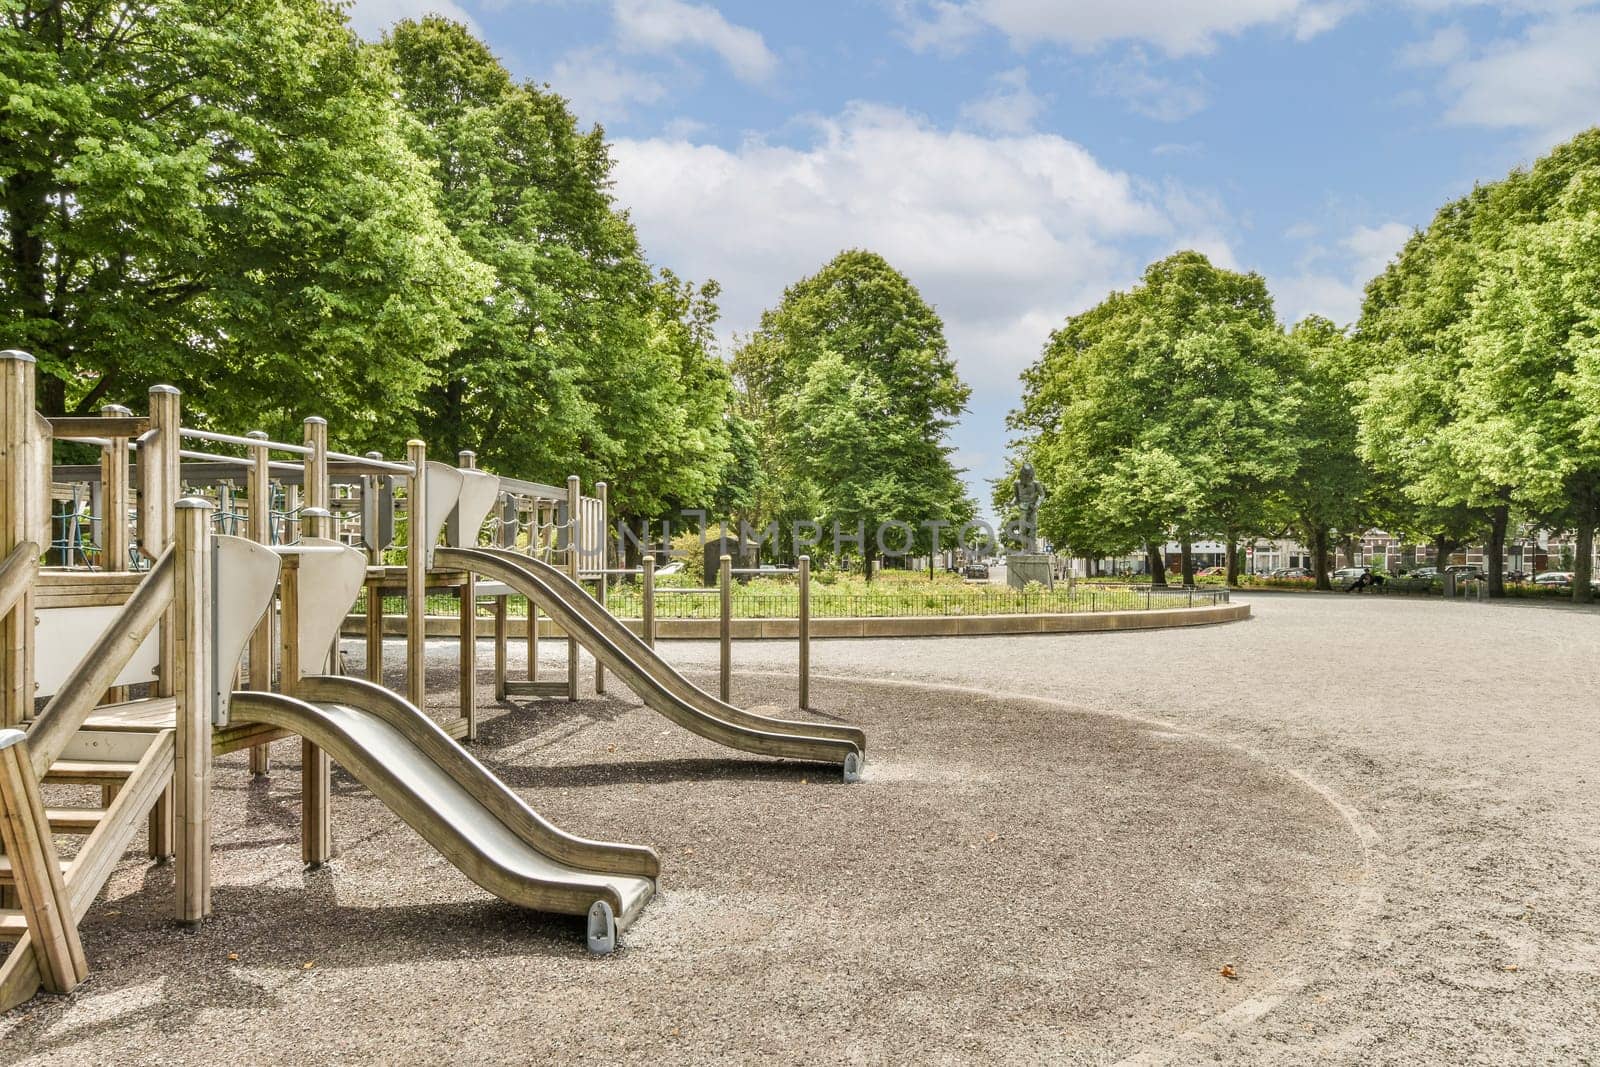 an empty playground in the middle of a park with lots of trees and children's play equipment on it